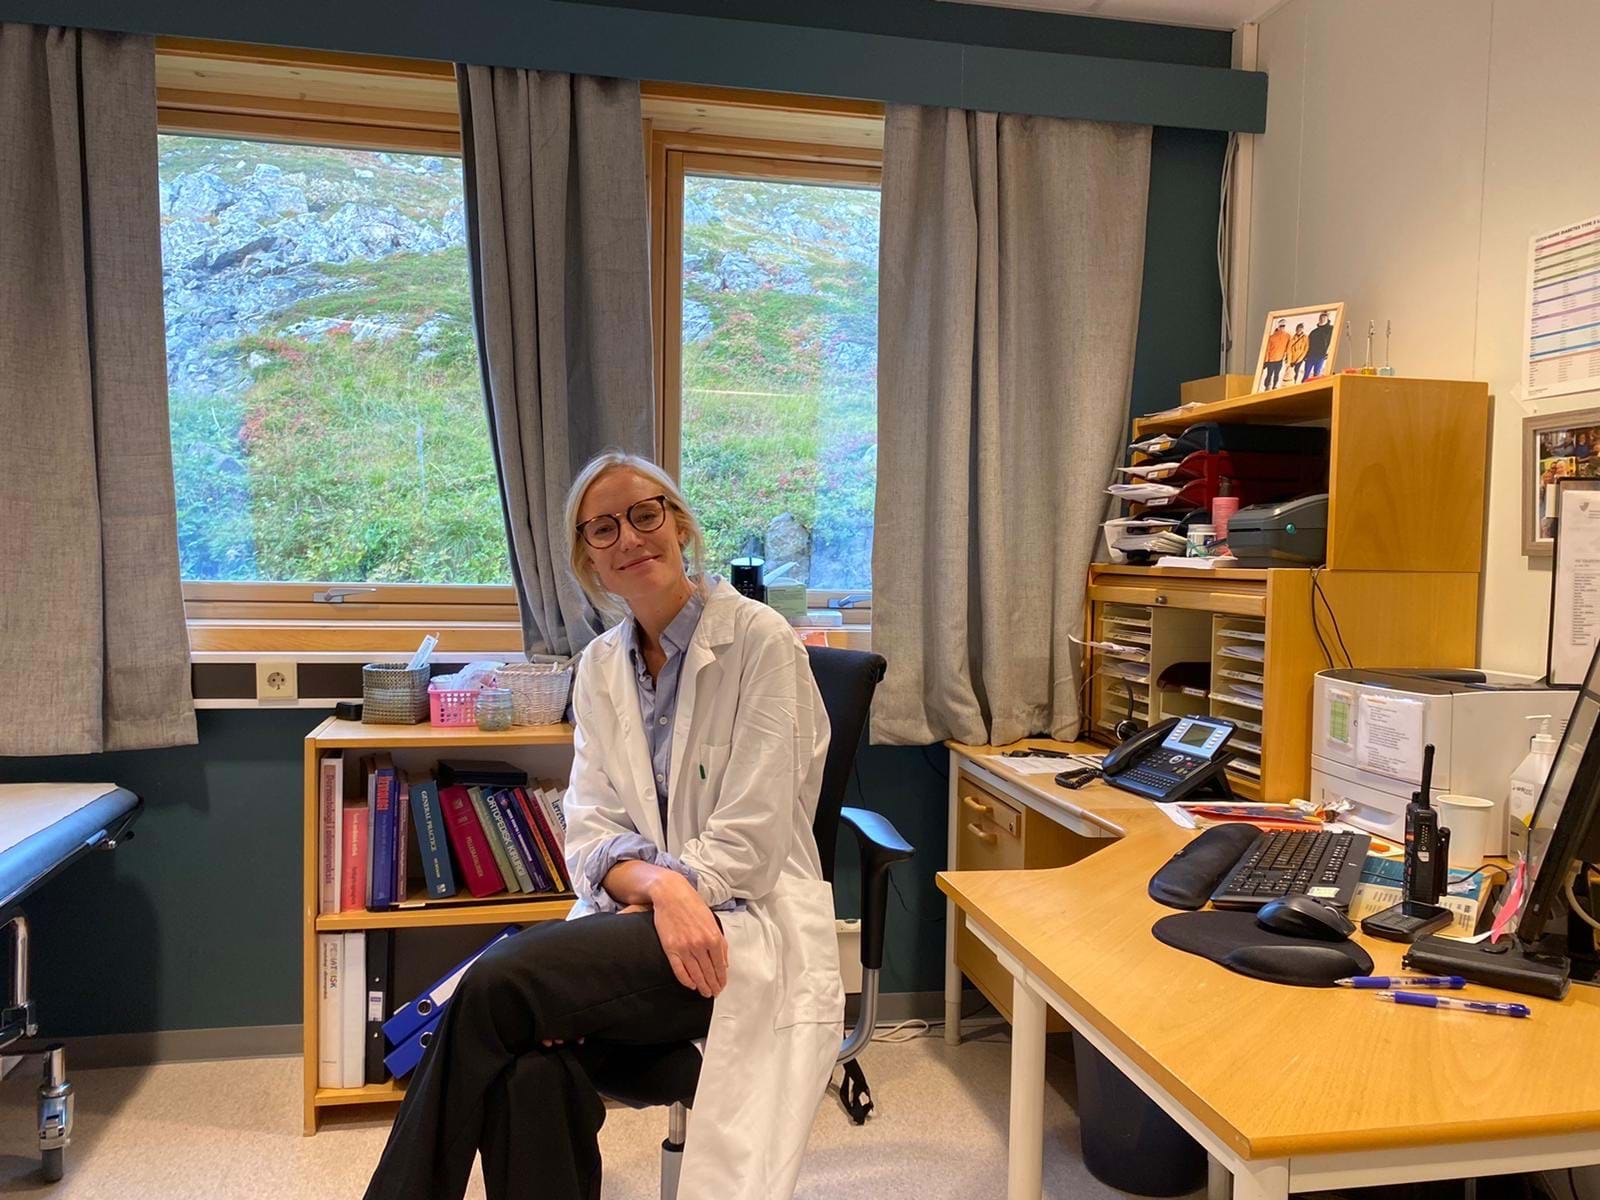 Female GP doctor in her office.  Lina Grönvall, foto privat